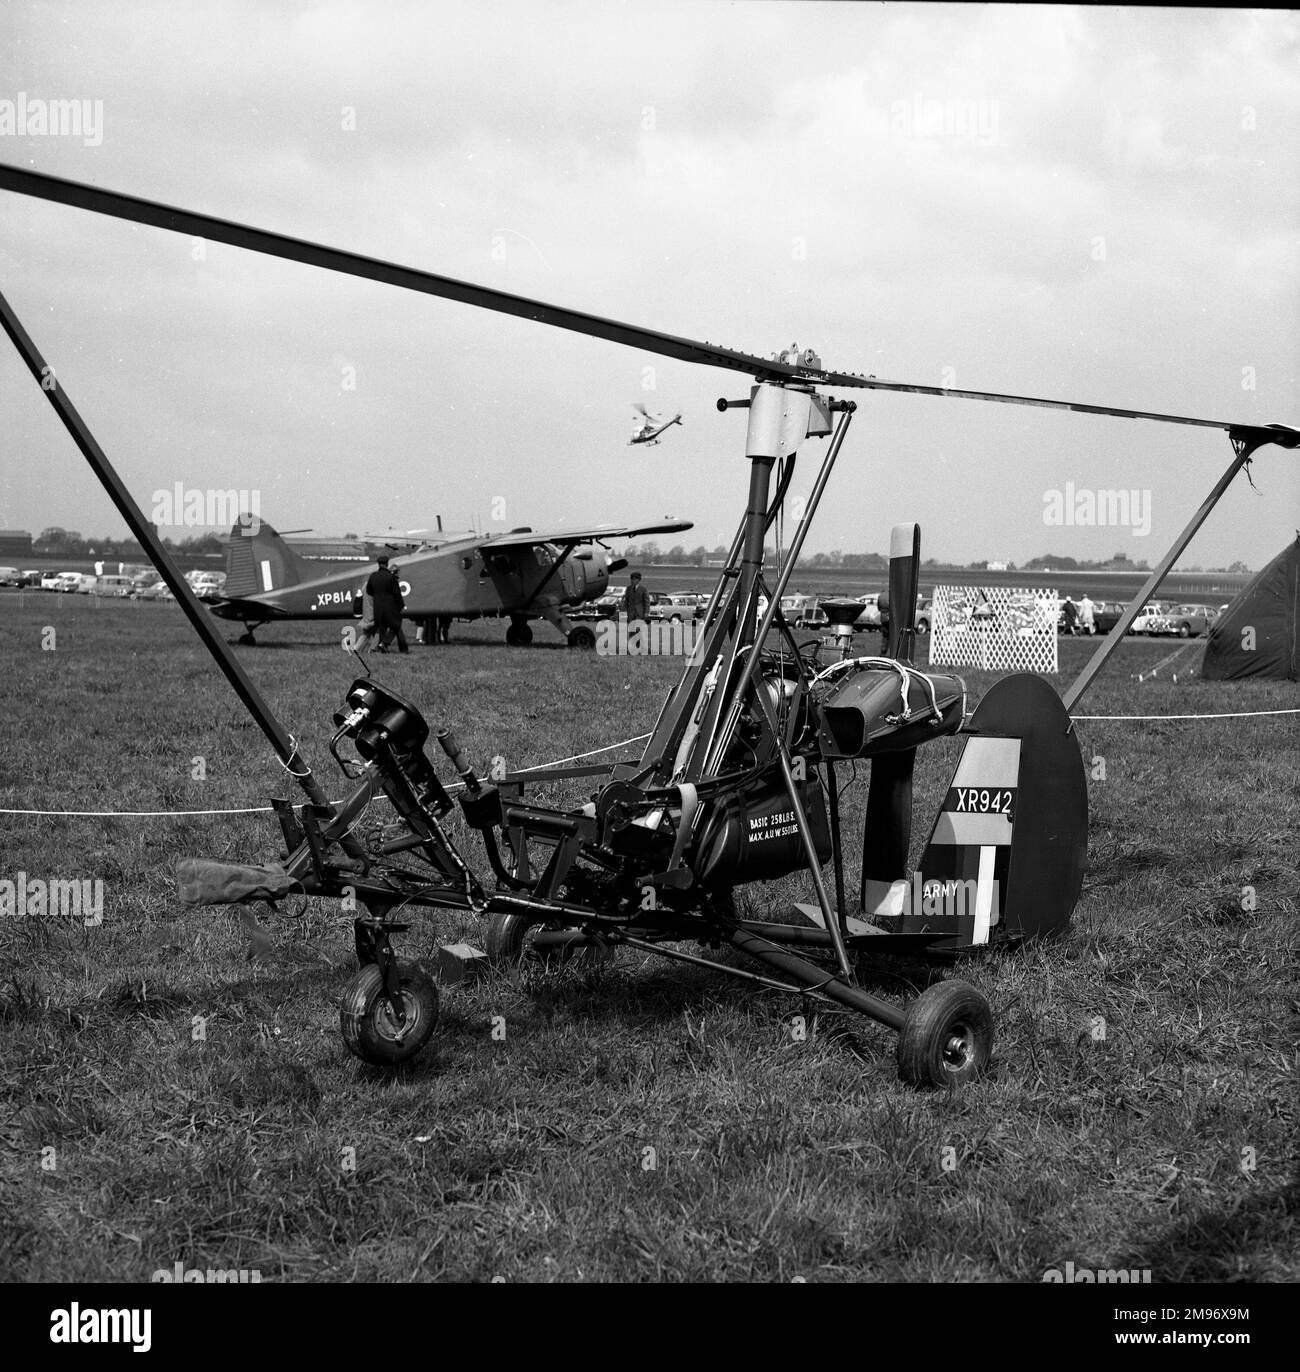 Built by Beagle Aircraft to the design of ex-RAF bomber pilot Wing Commander Ken Wallis, the Beagle-Wallis WA-116 was an autogyro created mainly for military reconnaissance and surveillance.  Ken Wallis flew a WA-116 in the James Bond film You Only Live Twice. Stock Photo